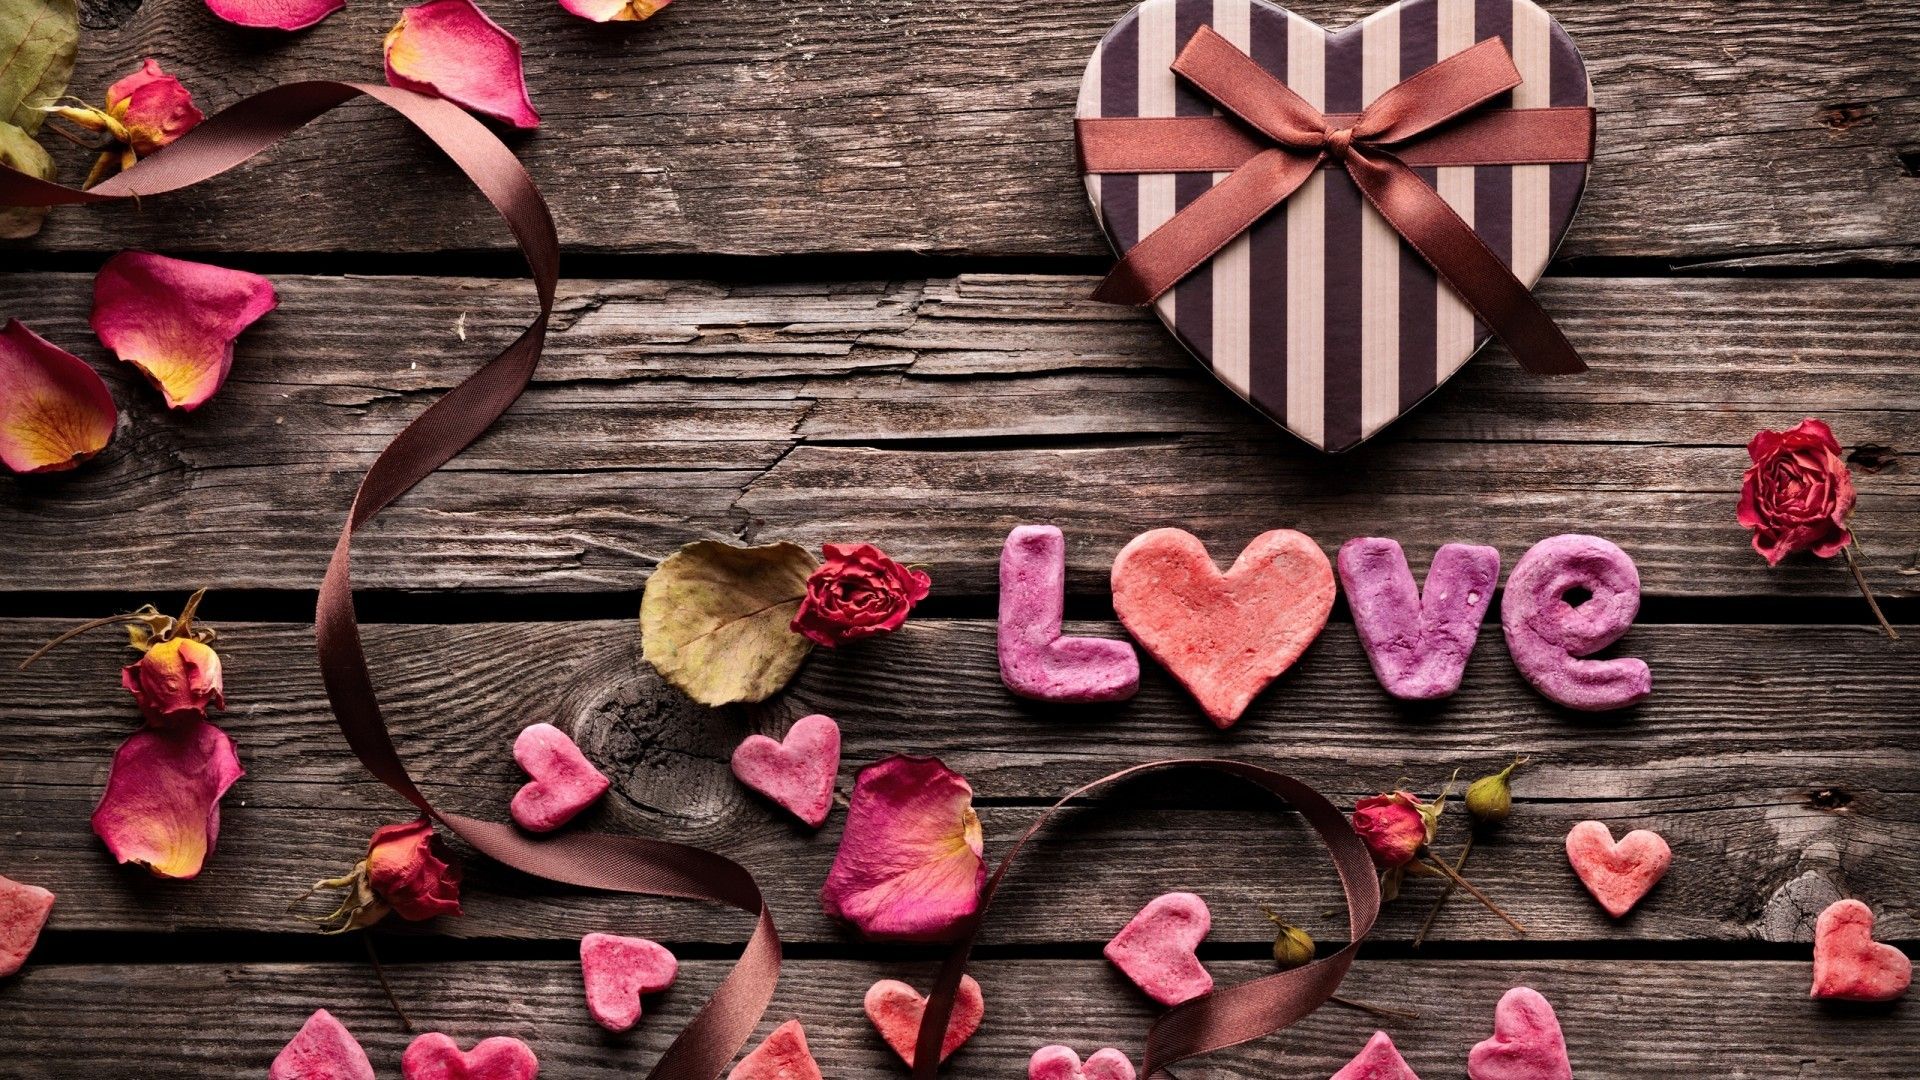 Download 1920x1080 Valentine's Day, Love, Wood, Heart, Leaves, Petals, Romance Wallpaper for Widescreen